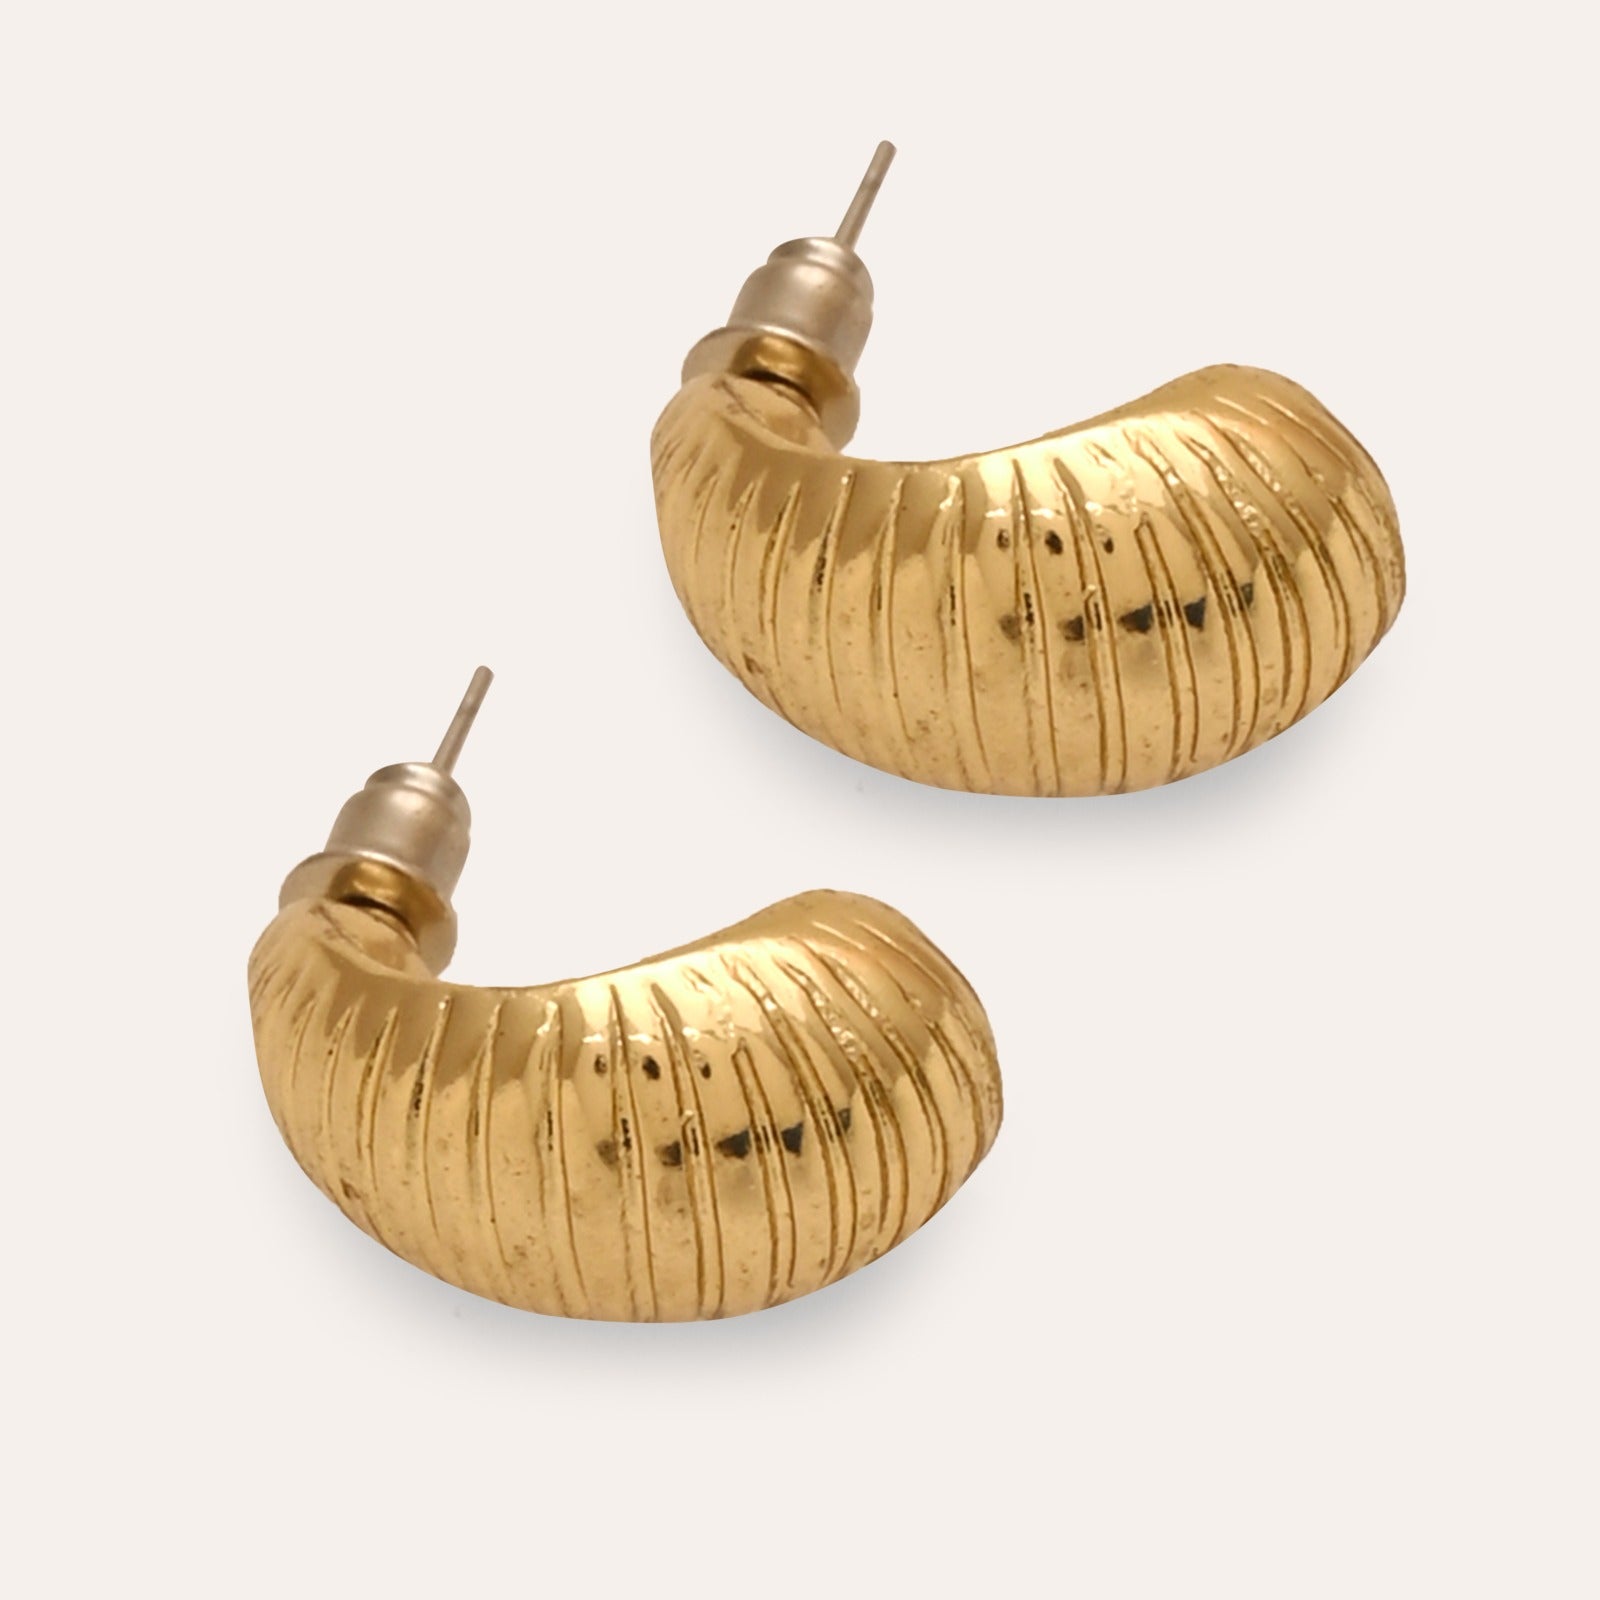 TFC Purrfectly adorable gold plated stud earrings-Discover daily wear gold earrings including stud earrings, hoop earrings, and pearl earrings, perfect as earrings for women and earrings for girls.Find the cheapest fashion jewellery which is anti-tarnis​h only at The Fun company.